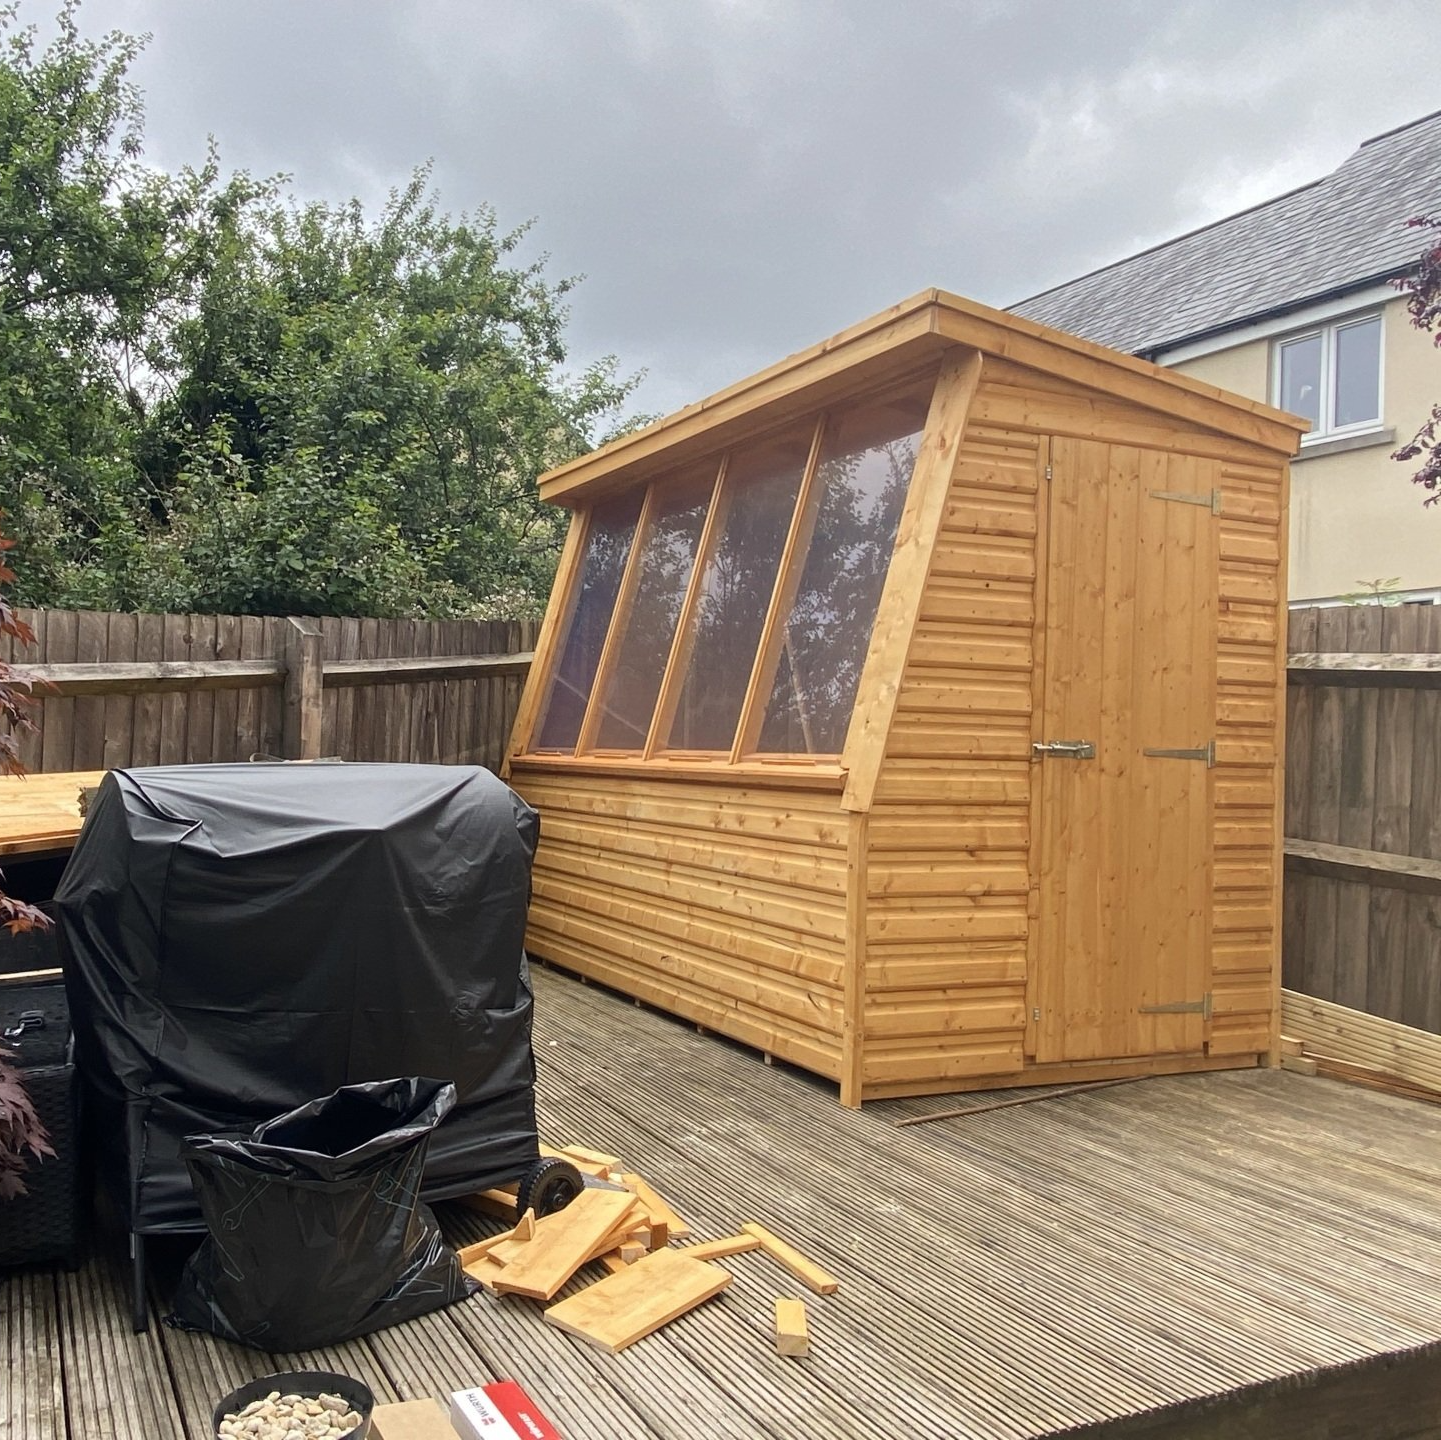 7' x 5' Potting shed installed on top of decking.